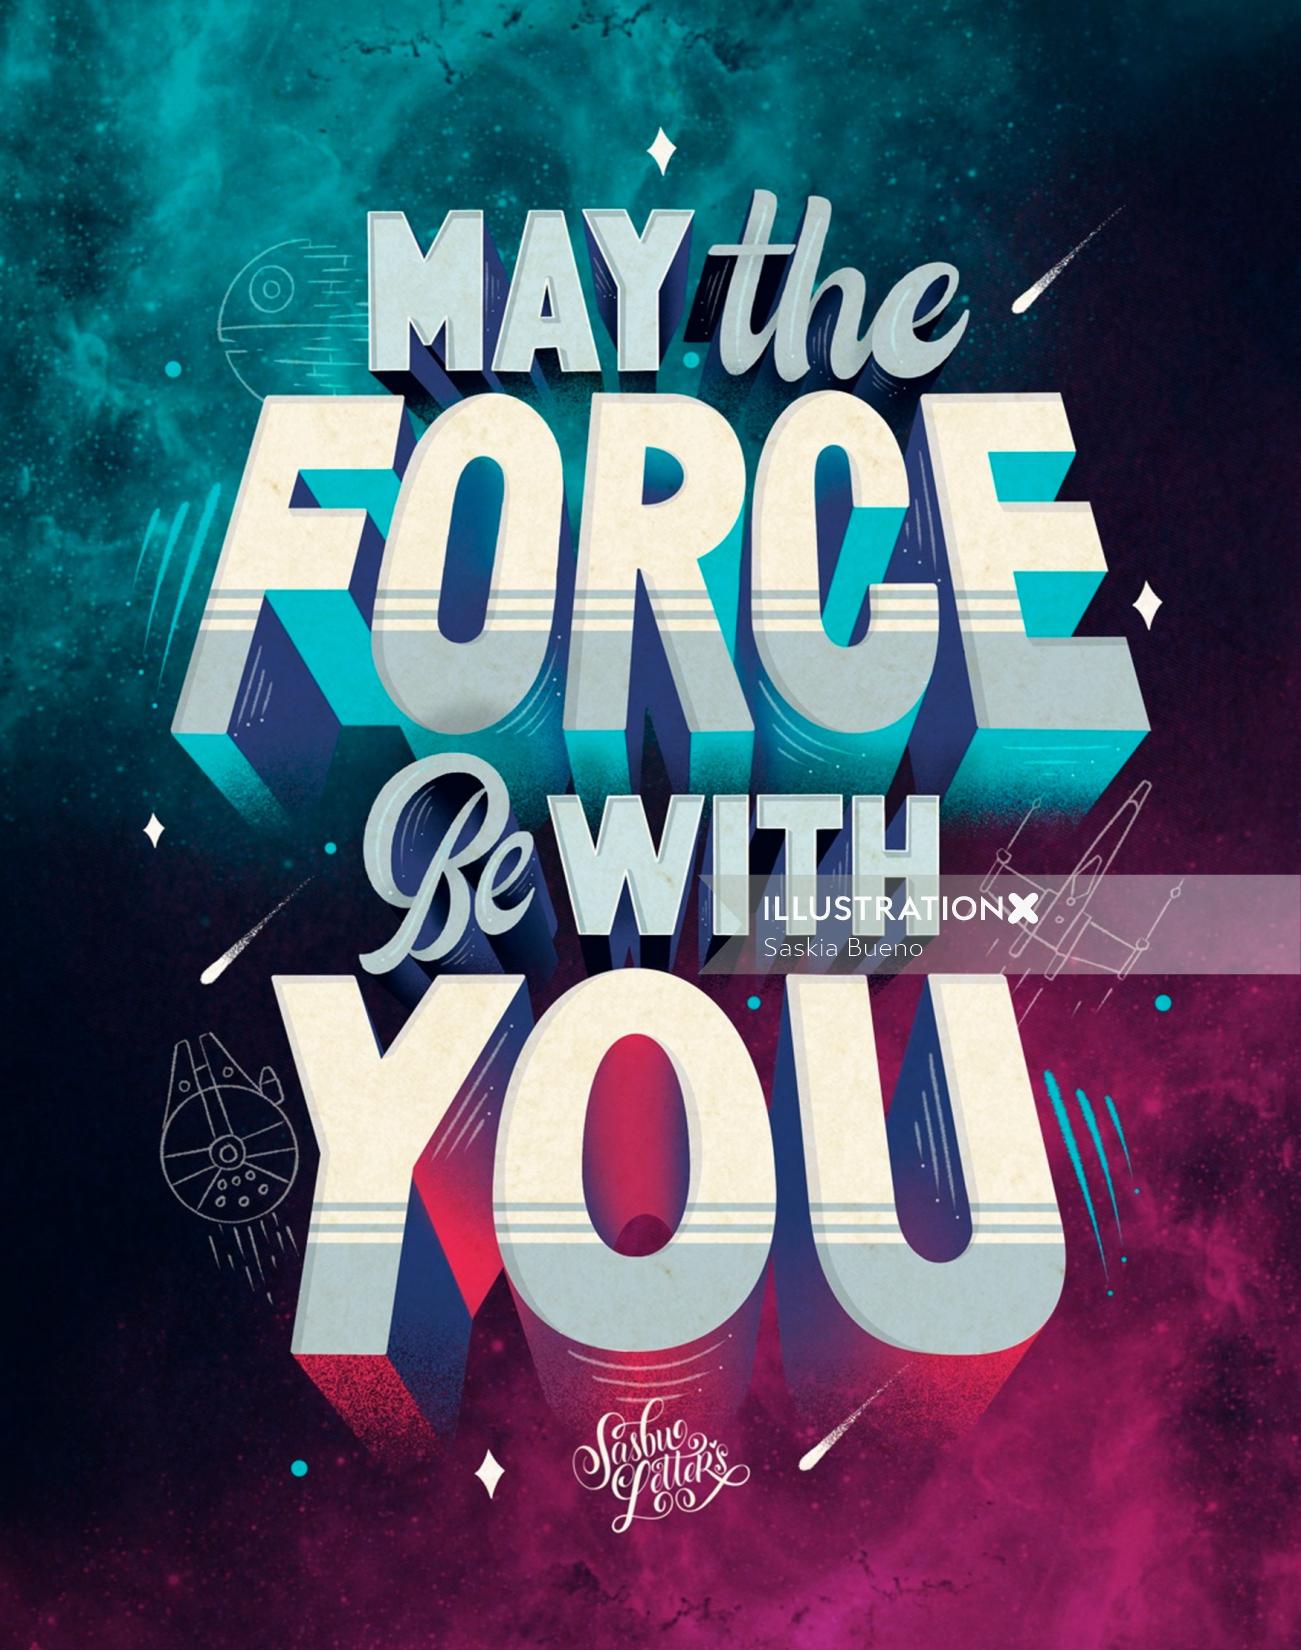 Lettering art of may the force be with you 